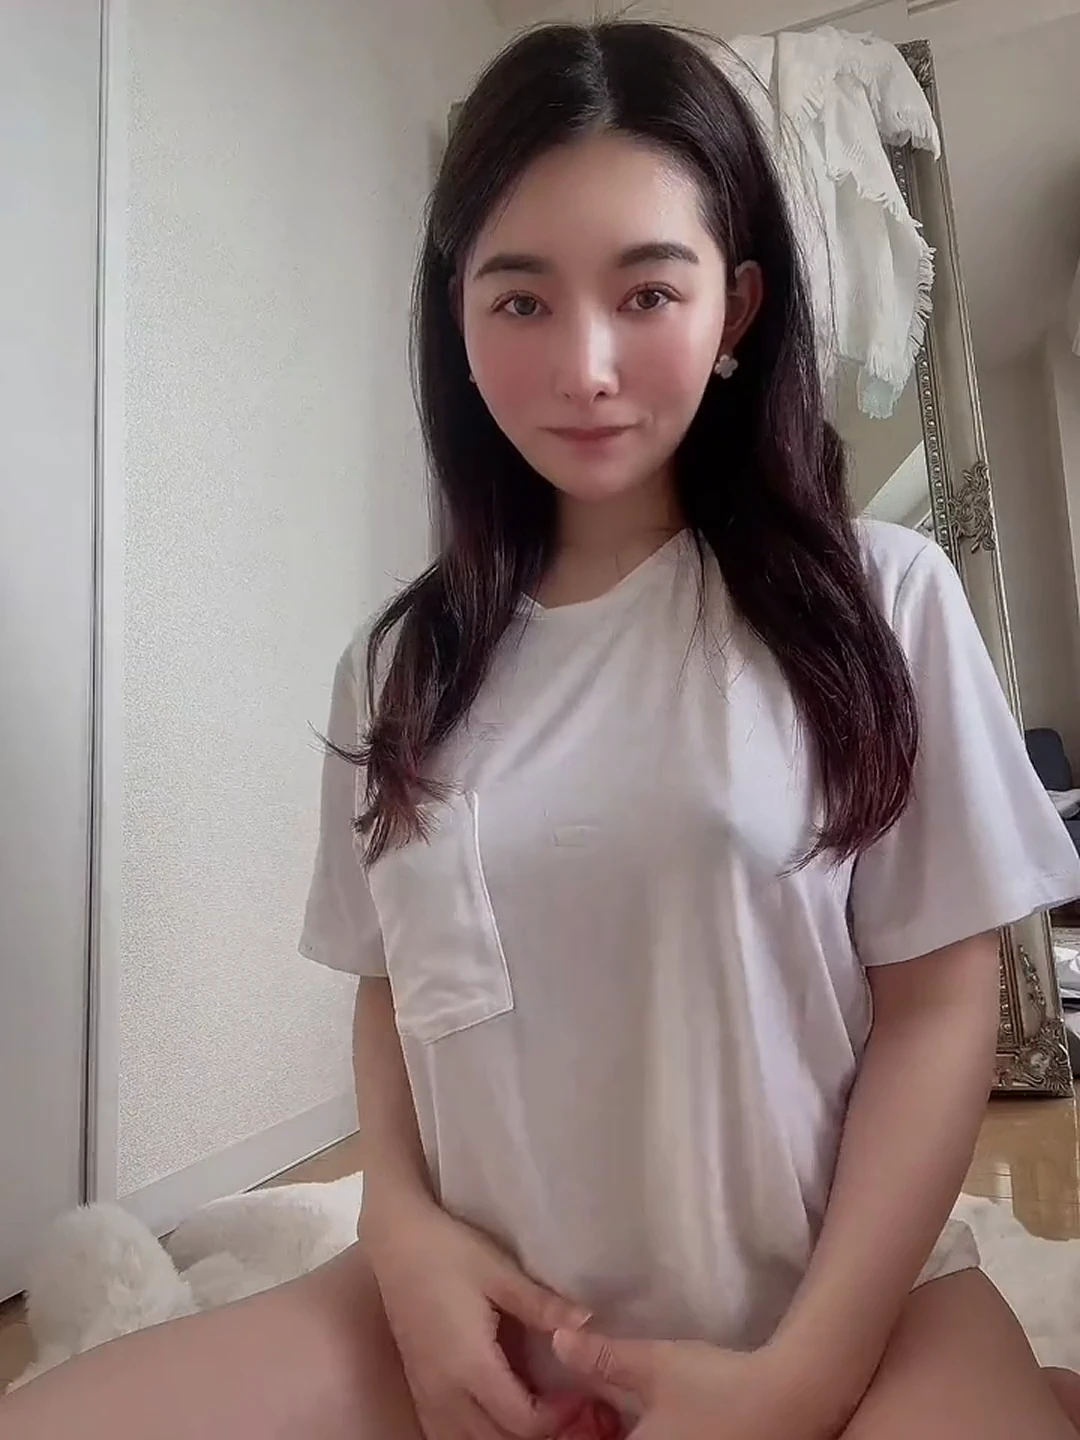 Our perfect princess Rikakodesu looking like the perfect cutest girlfriend in the white t shirt 💕💕💕